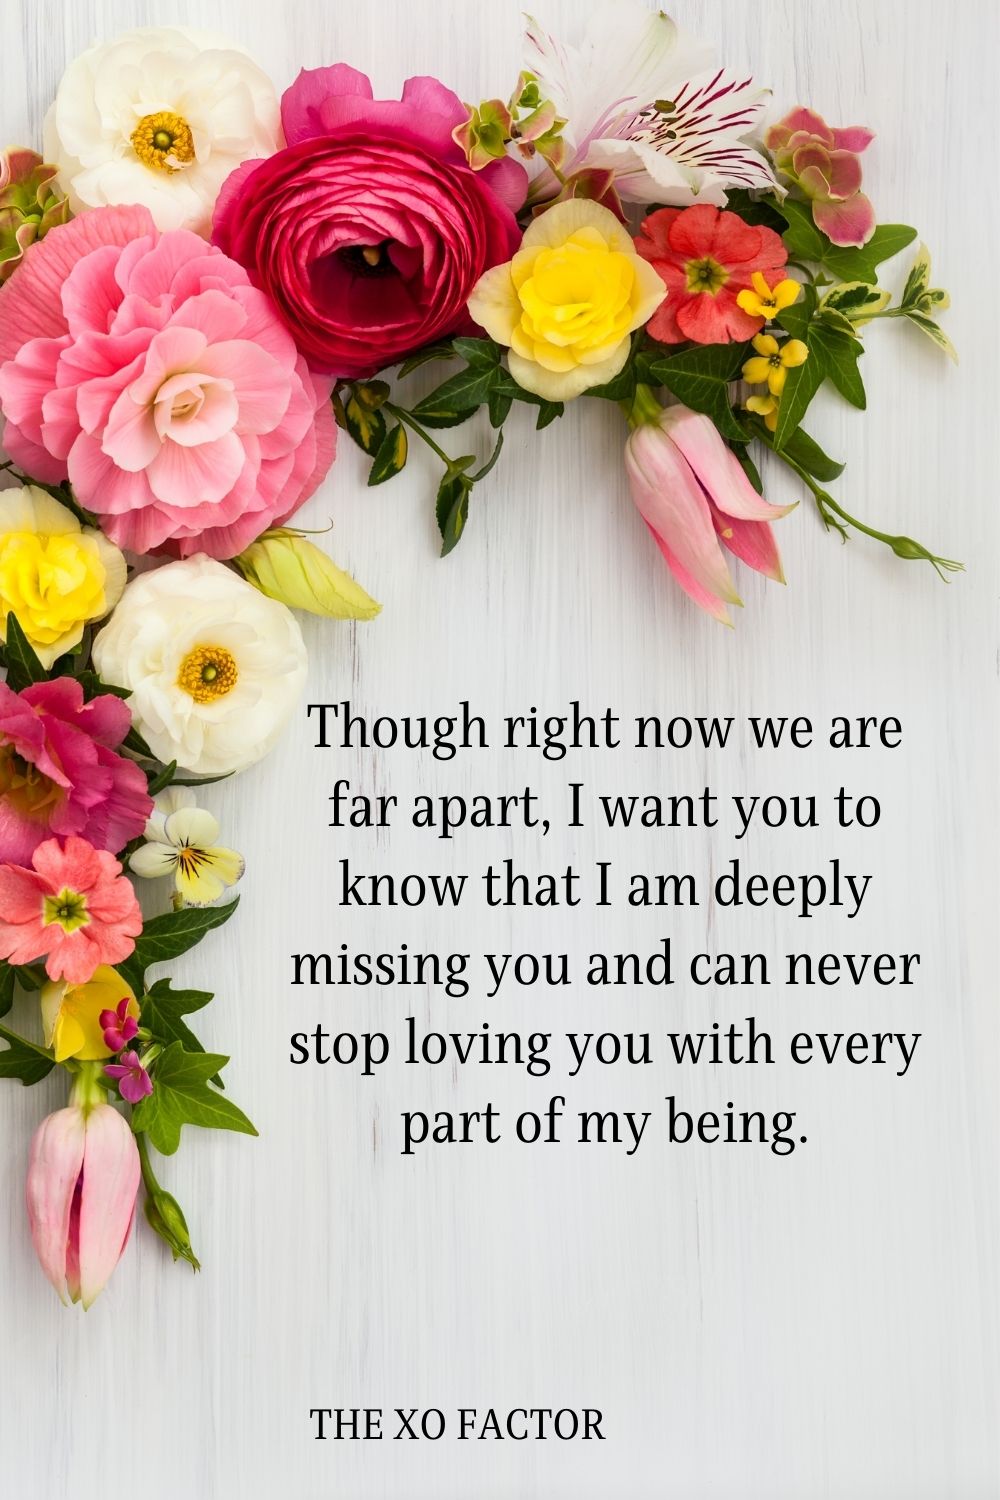 Though right now we are far apart, I want you to know that I am deeply missing you and can never stop loving you with every part of my being.